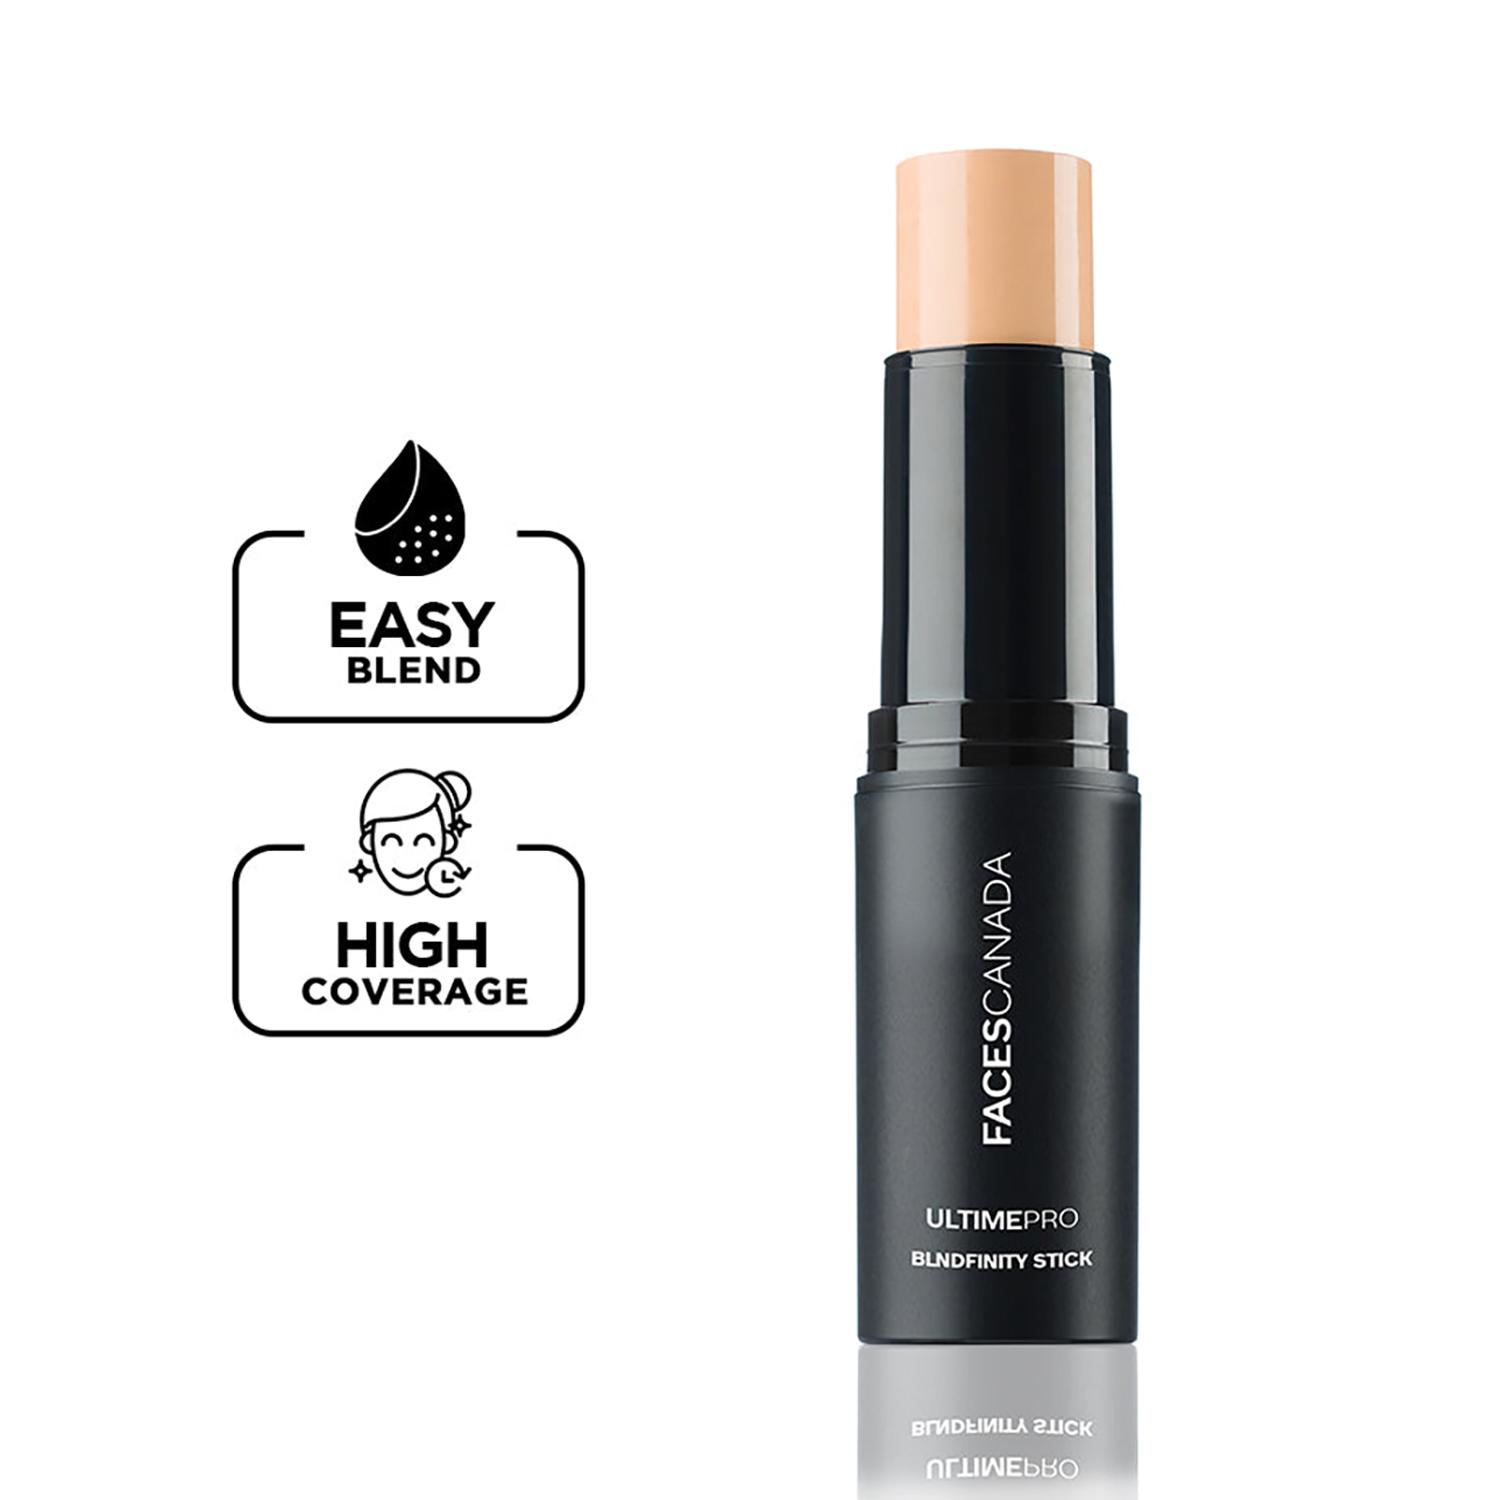 Faces Canada | Faces Canada Ultime Pro BlendFinity Stick Foundation - Natural, Creamy Texture (10 g)